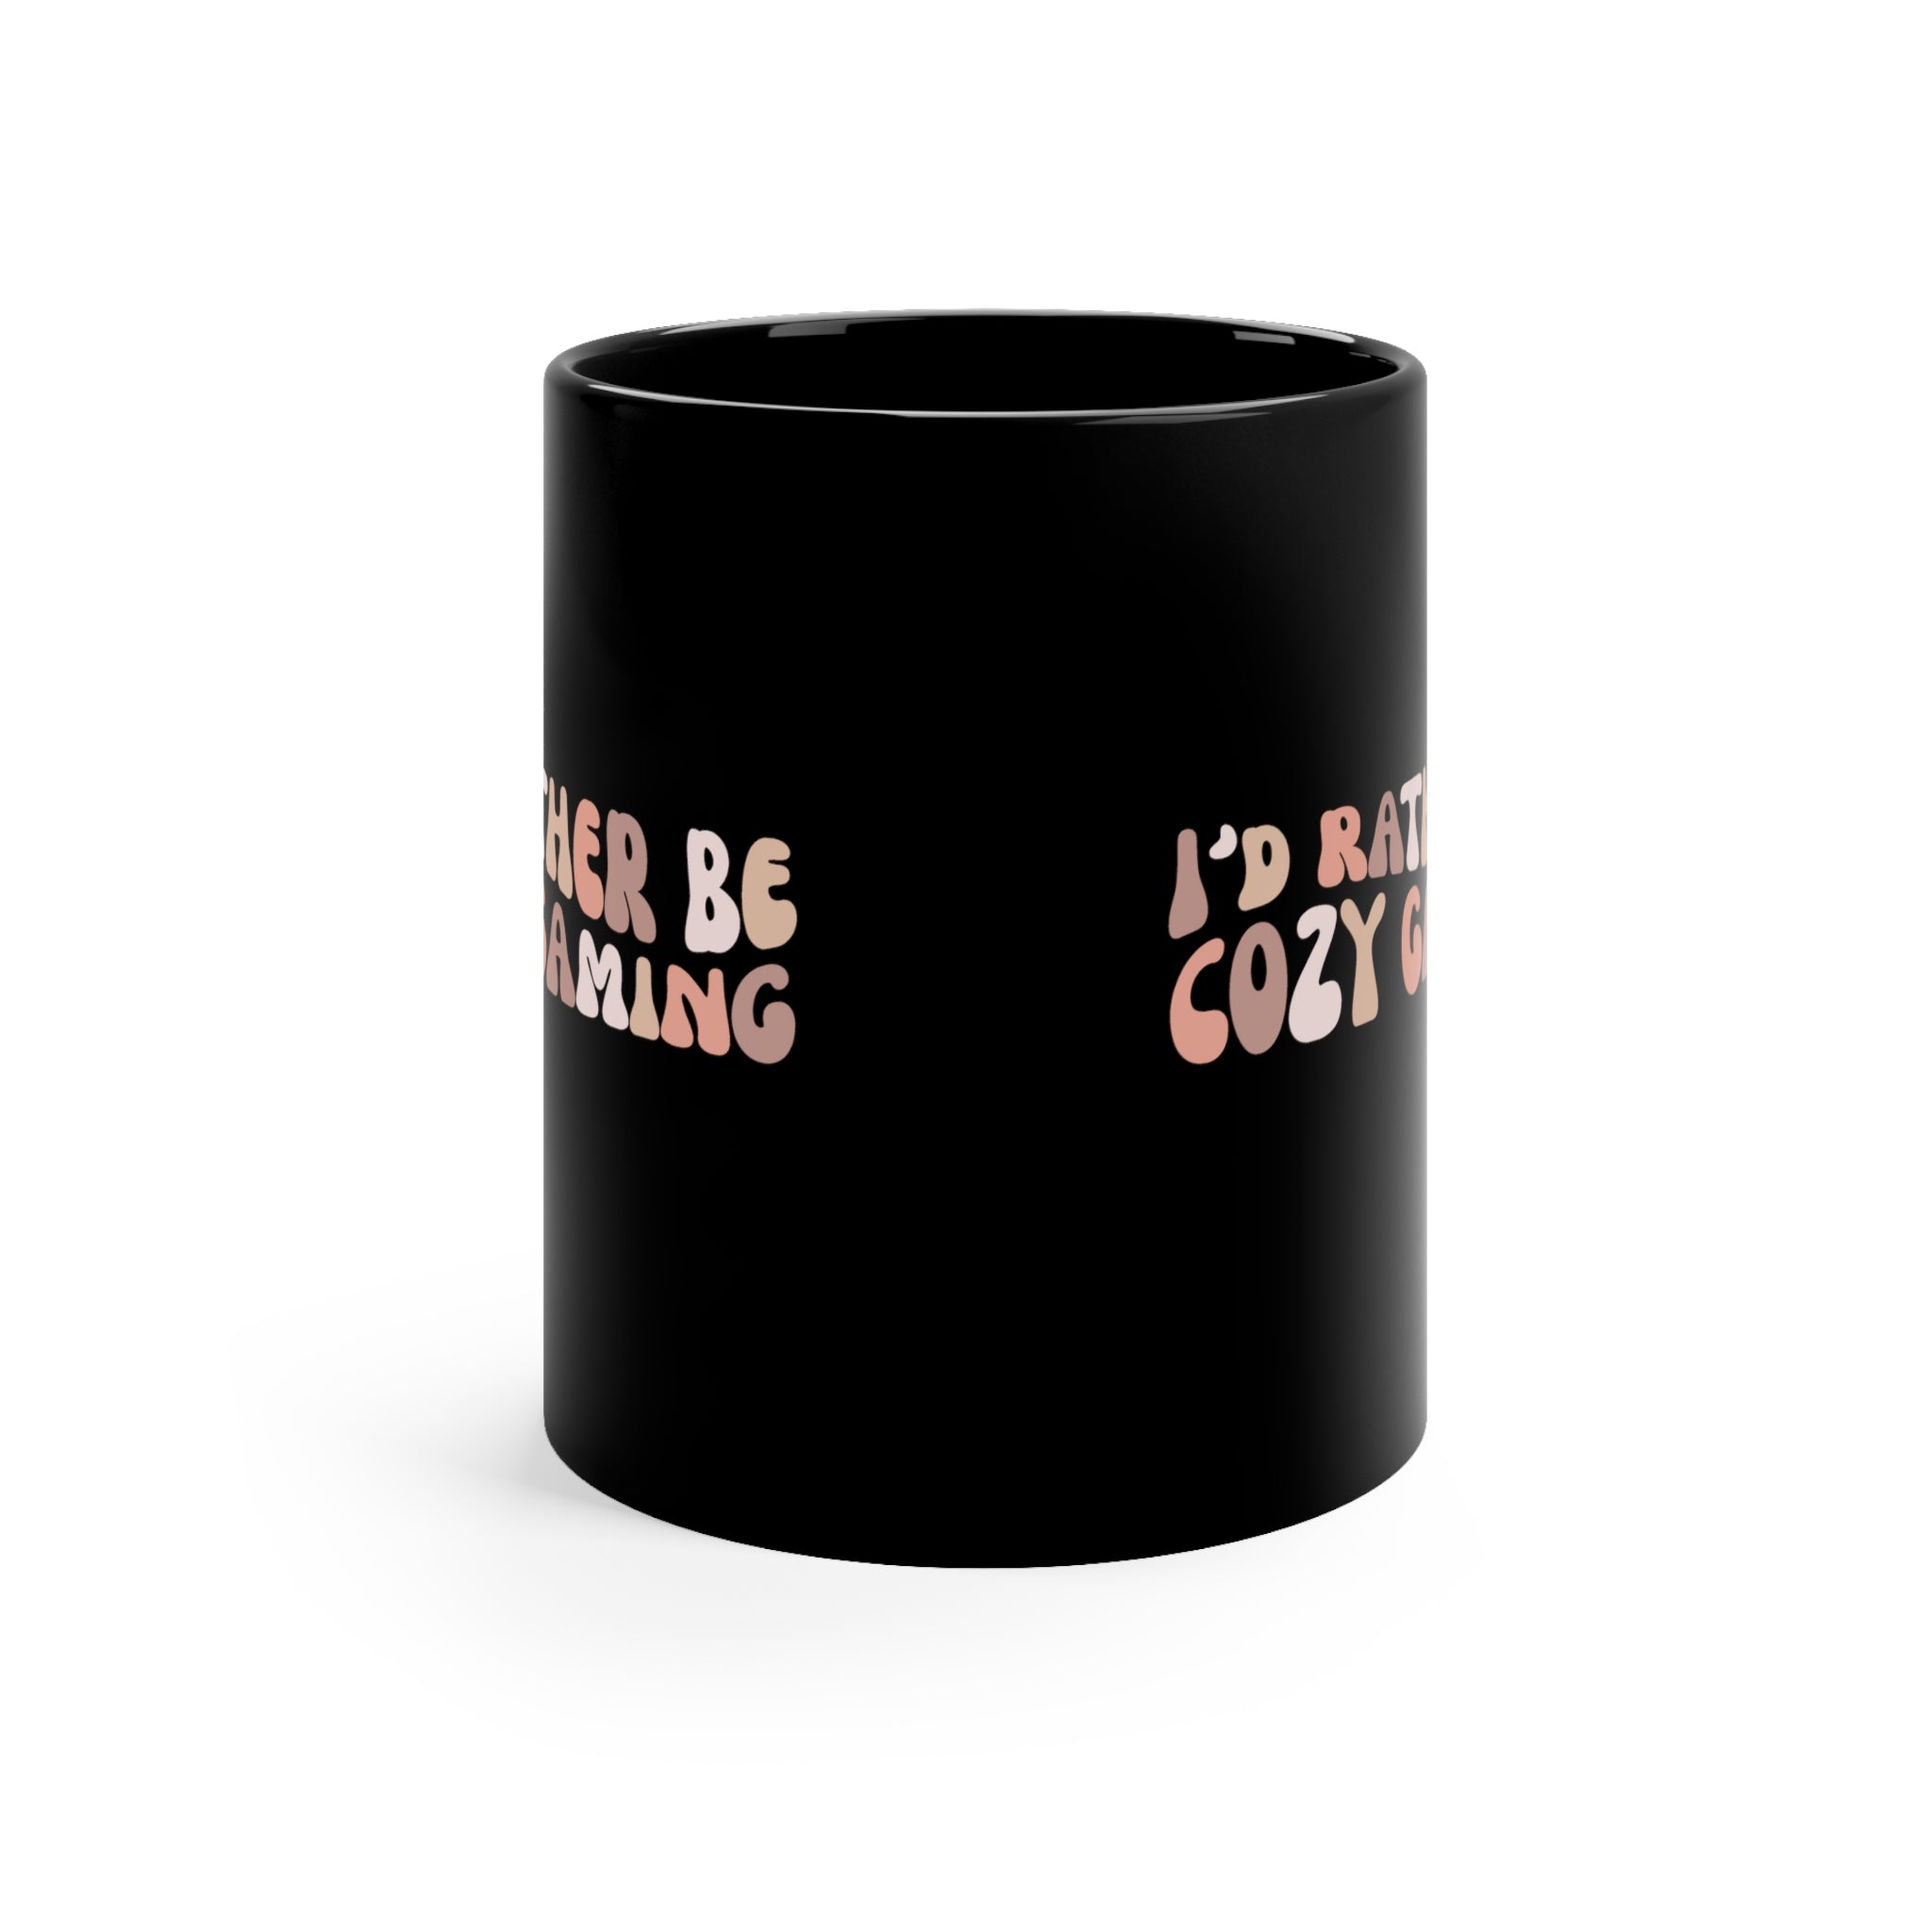 I'd Rather Be Cozy Gaming Coffee Mug  - Gift for Gamers